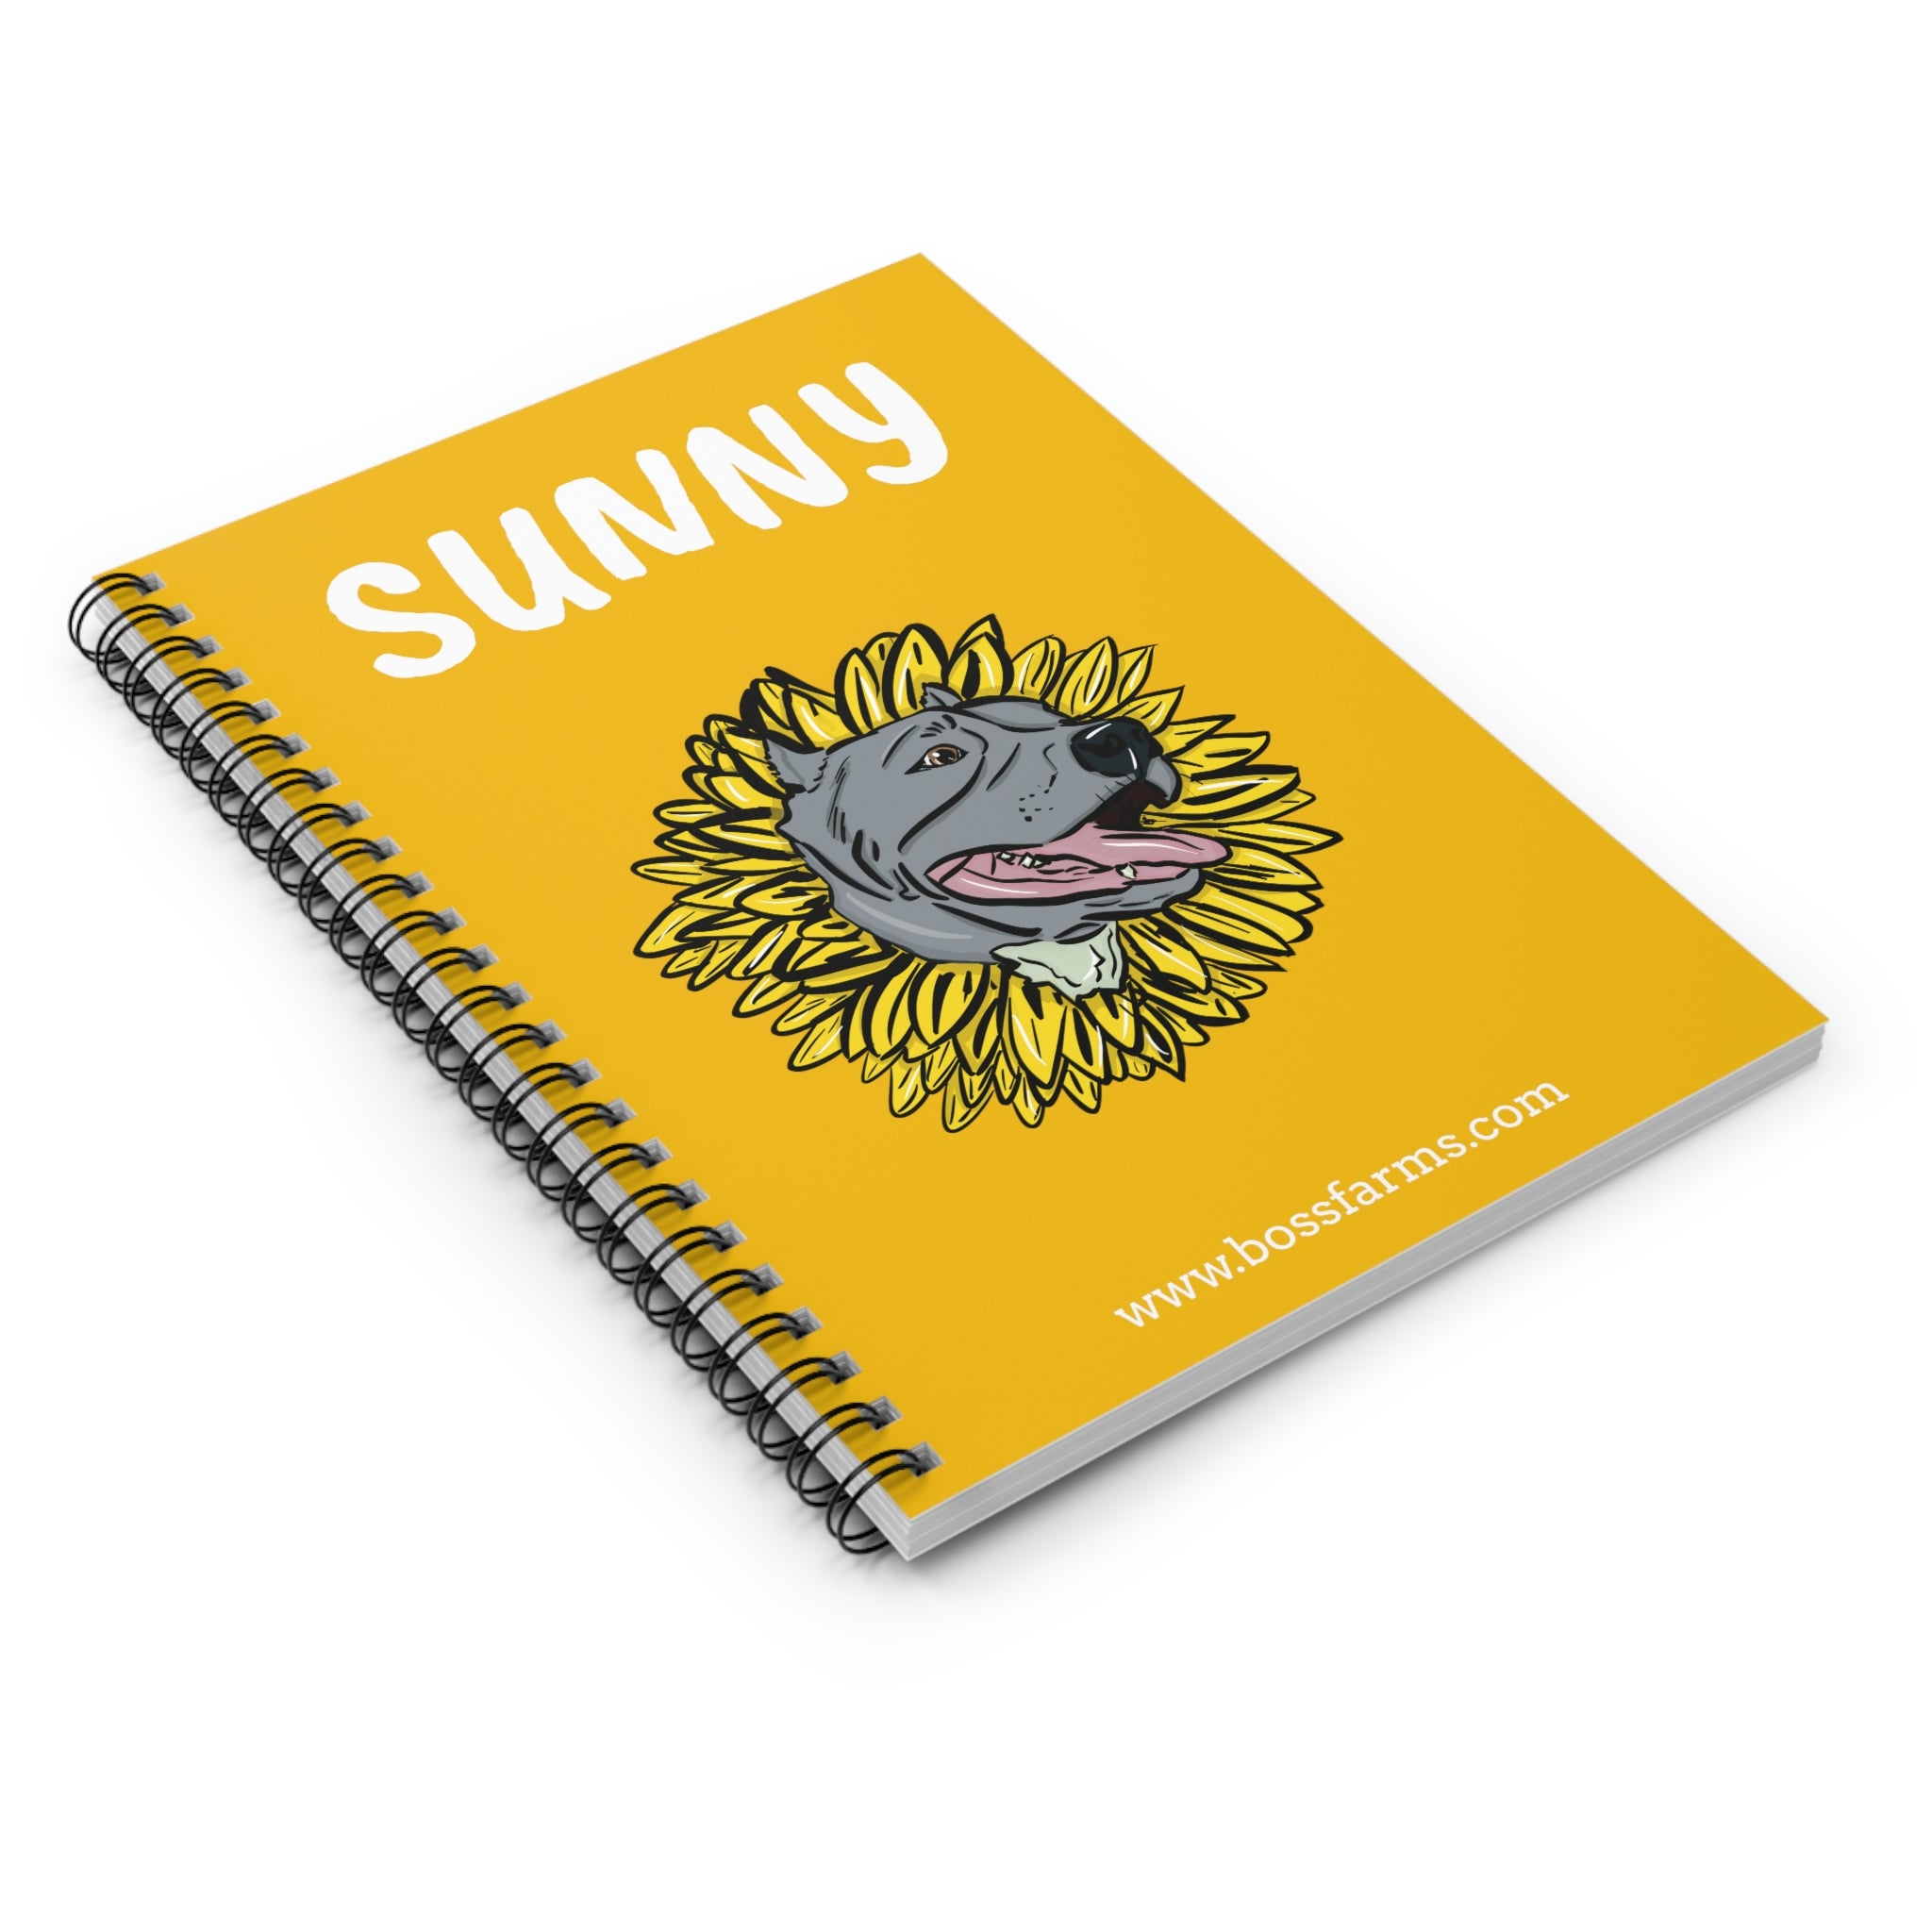 Sunny Spiral Notebook - Ruled Line